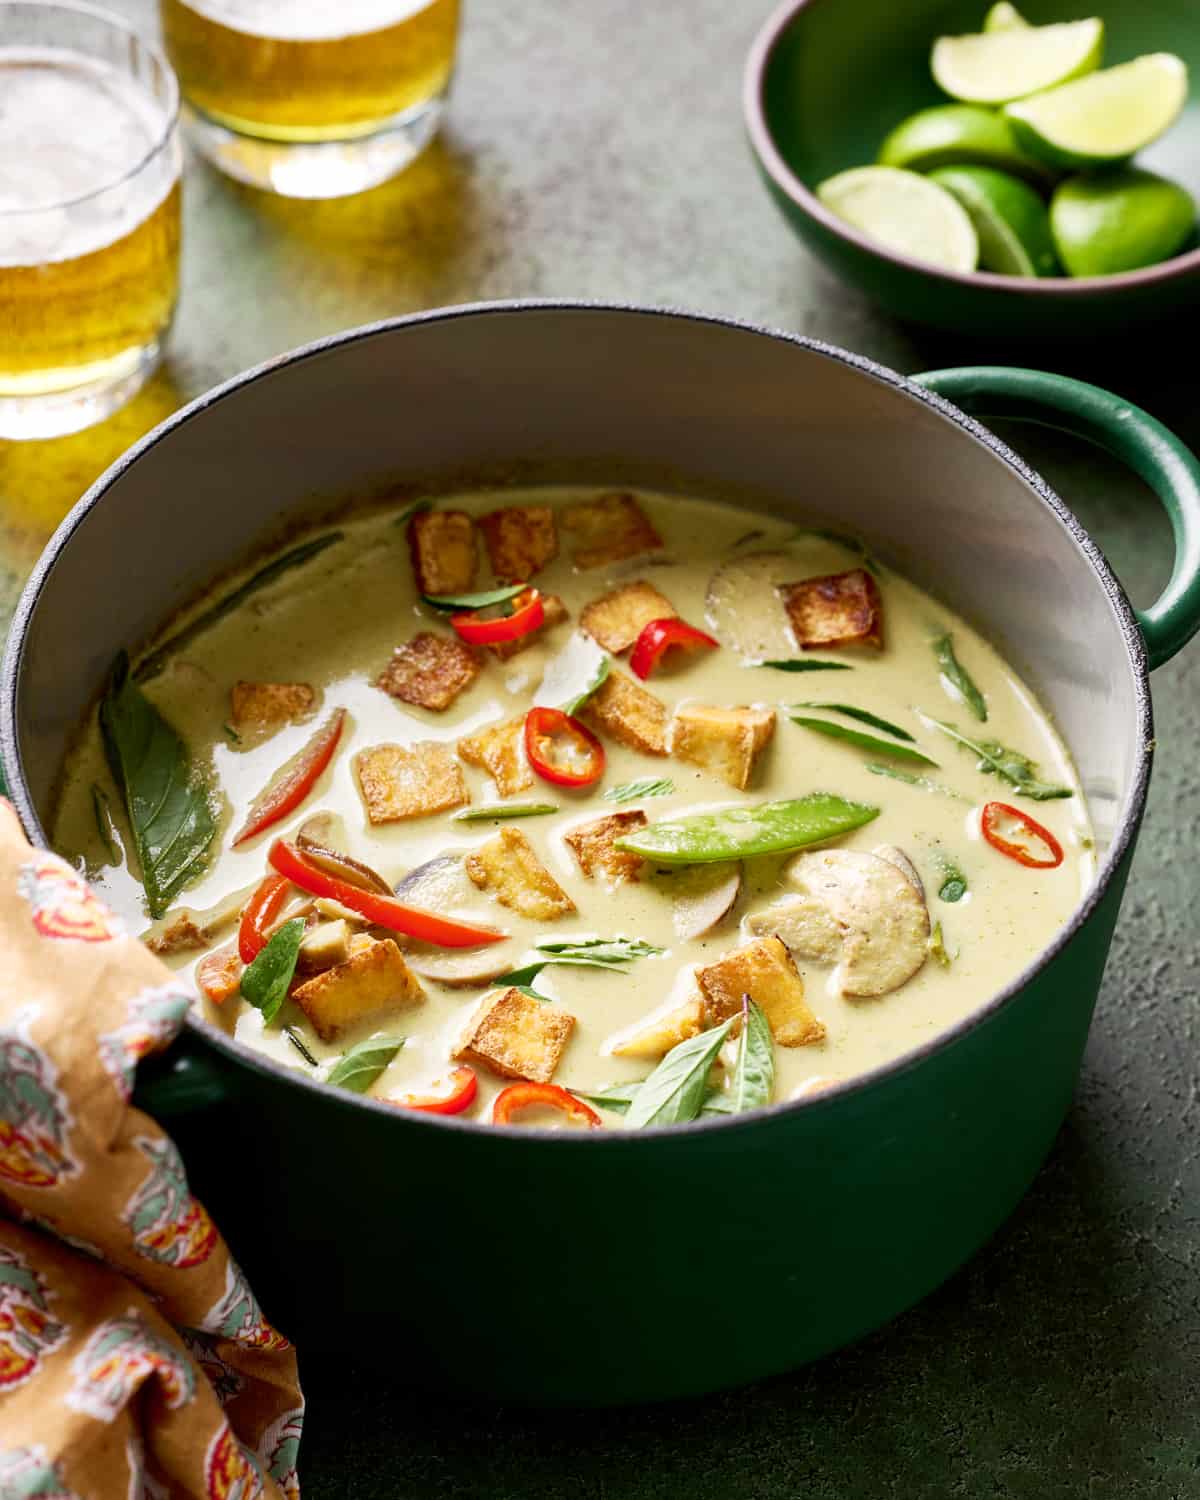 backlit shot of Thai vegan green curry with crispy tofu and vegetables in a green saucepan with beer and limes in background.